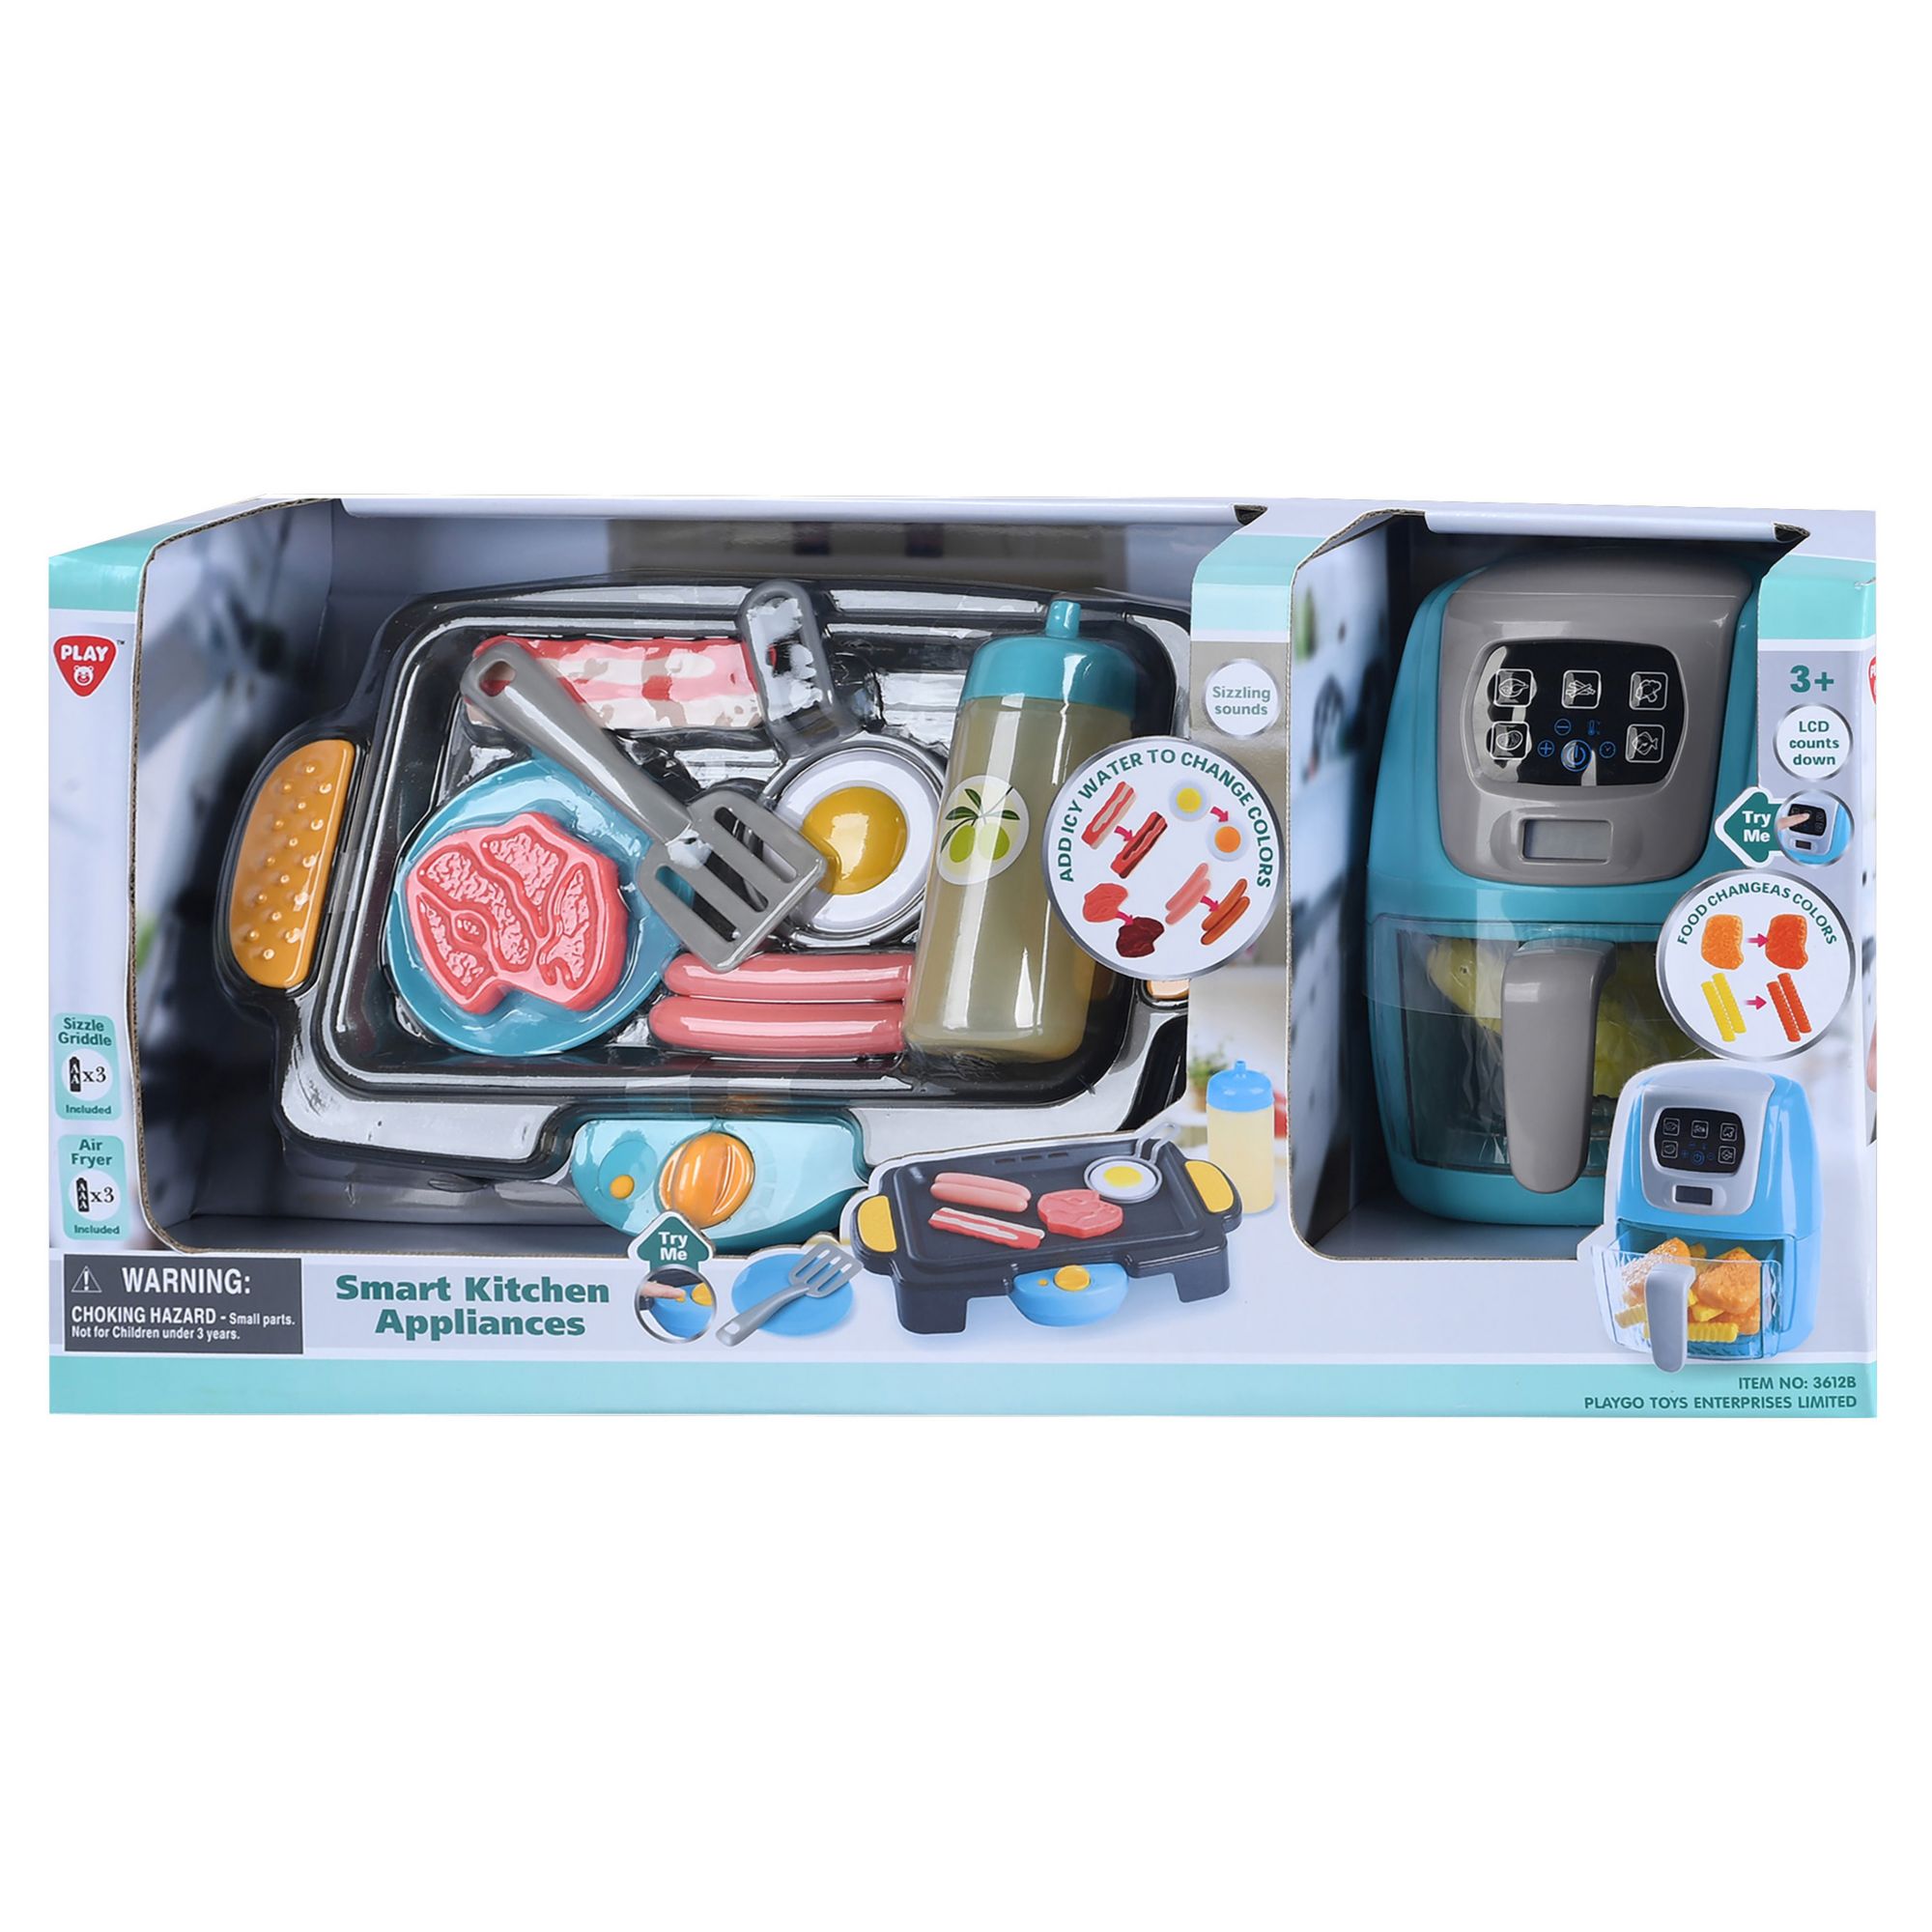 Kmart has released a mini air fryer toy for kids